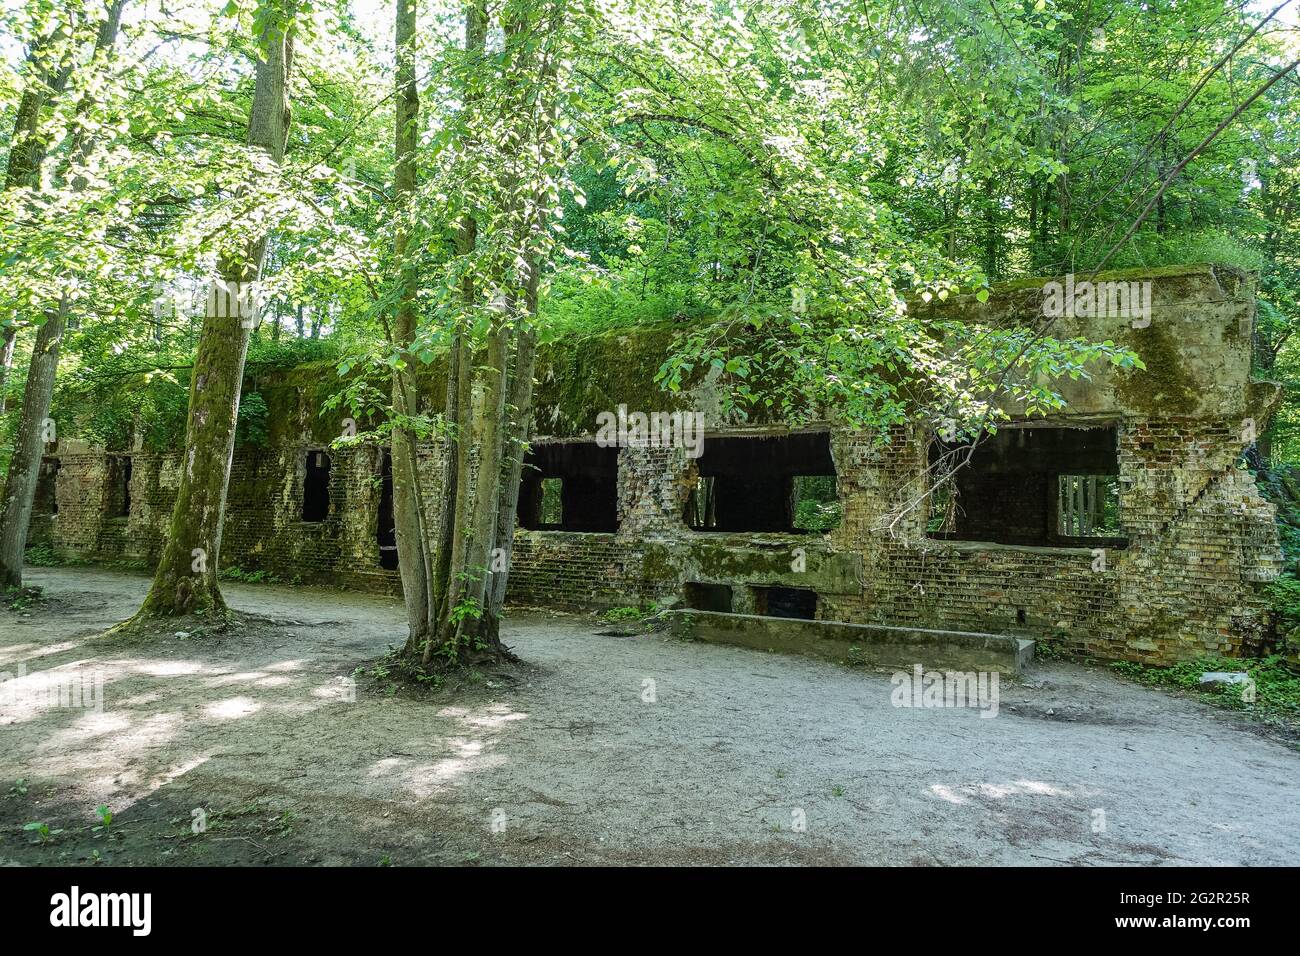 Gierloz, Poland. 2nd June, 2021. People visiting the WWII era Adolf Hitler's quarters hidden in a forest near Gierloz, Poland, are seen on 3 June 2021 r Wolf's Lair (ger. Wolfsschanze) ruins of Adolf Hilter's war headquarters was a hidden town in the woods consisting of 200 buildings: shelters, barracks, 2 airports, a power station, a railway station, air-conditioners, water supplies, heat-generating plants and two teleprinters (Photo by Vadim Pacajev/Sipa USA) Credit: Sipa USA/Alamy Live News Stock Photo